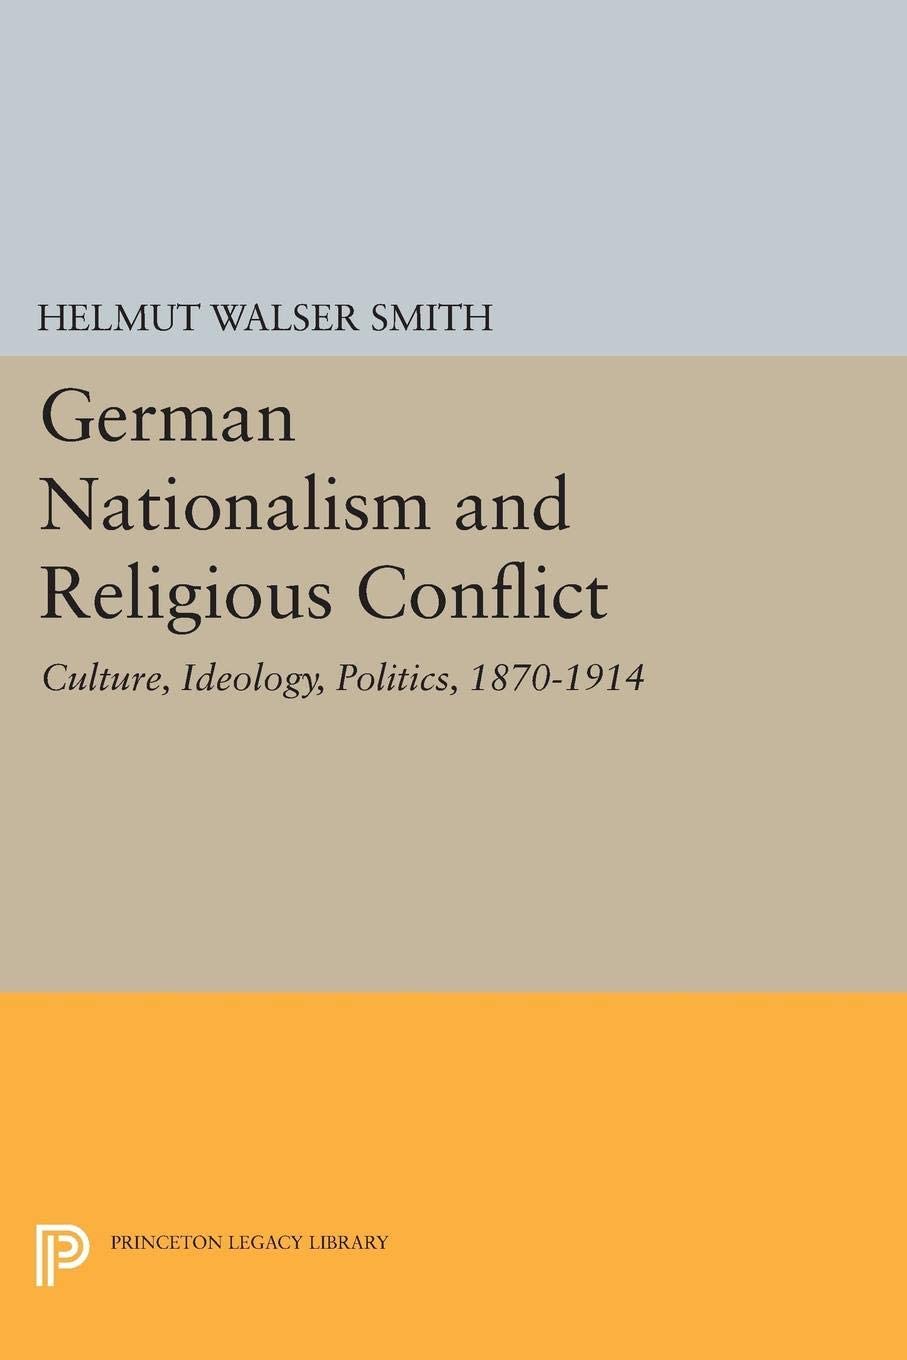 German Nationalism and Religious Conflict (Princeton Legacy Library, 286)